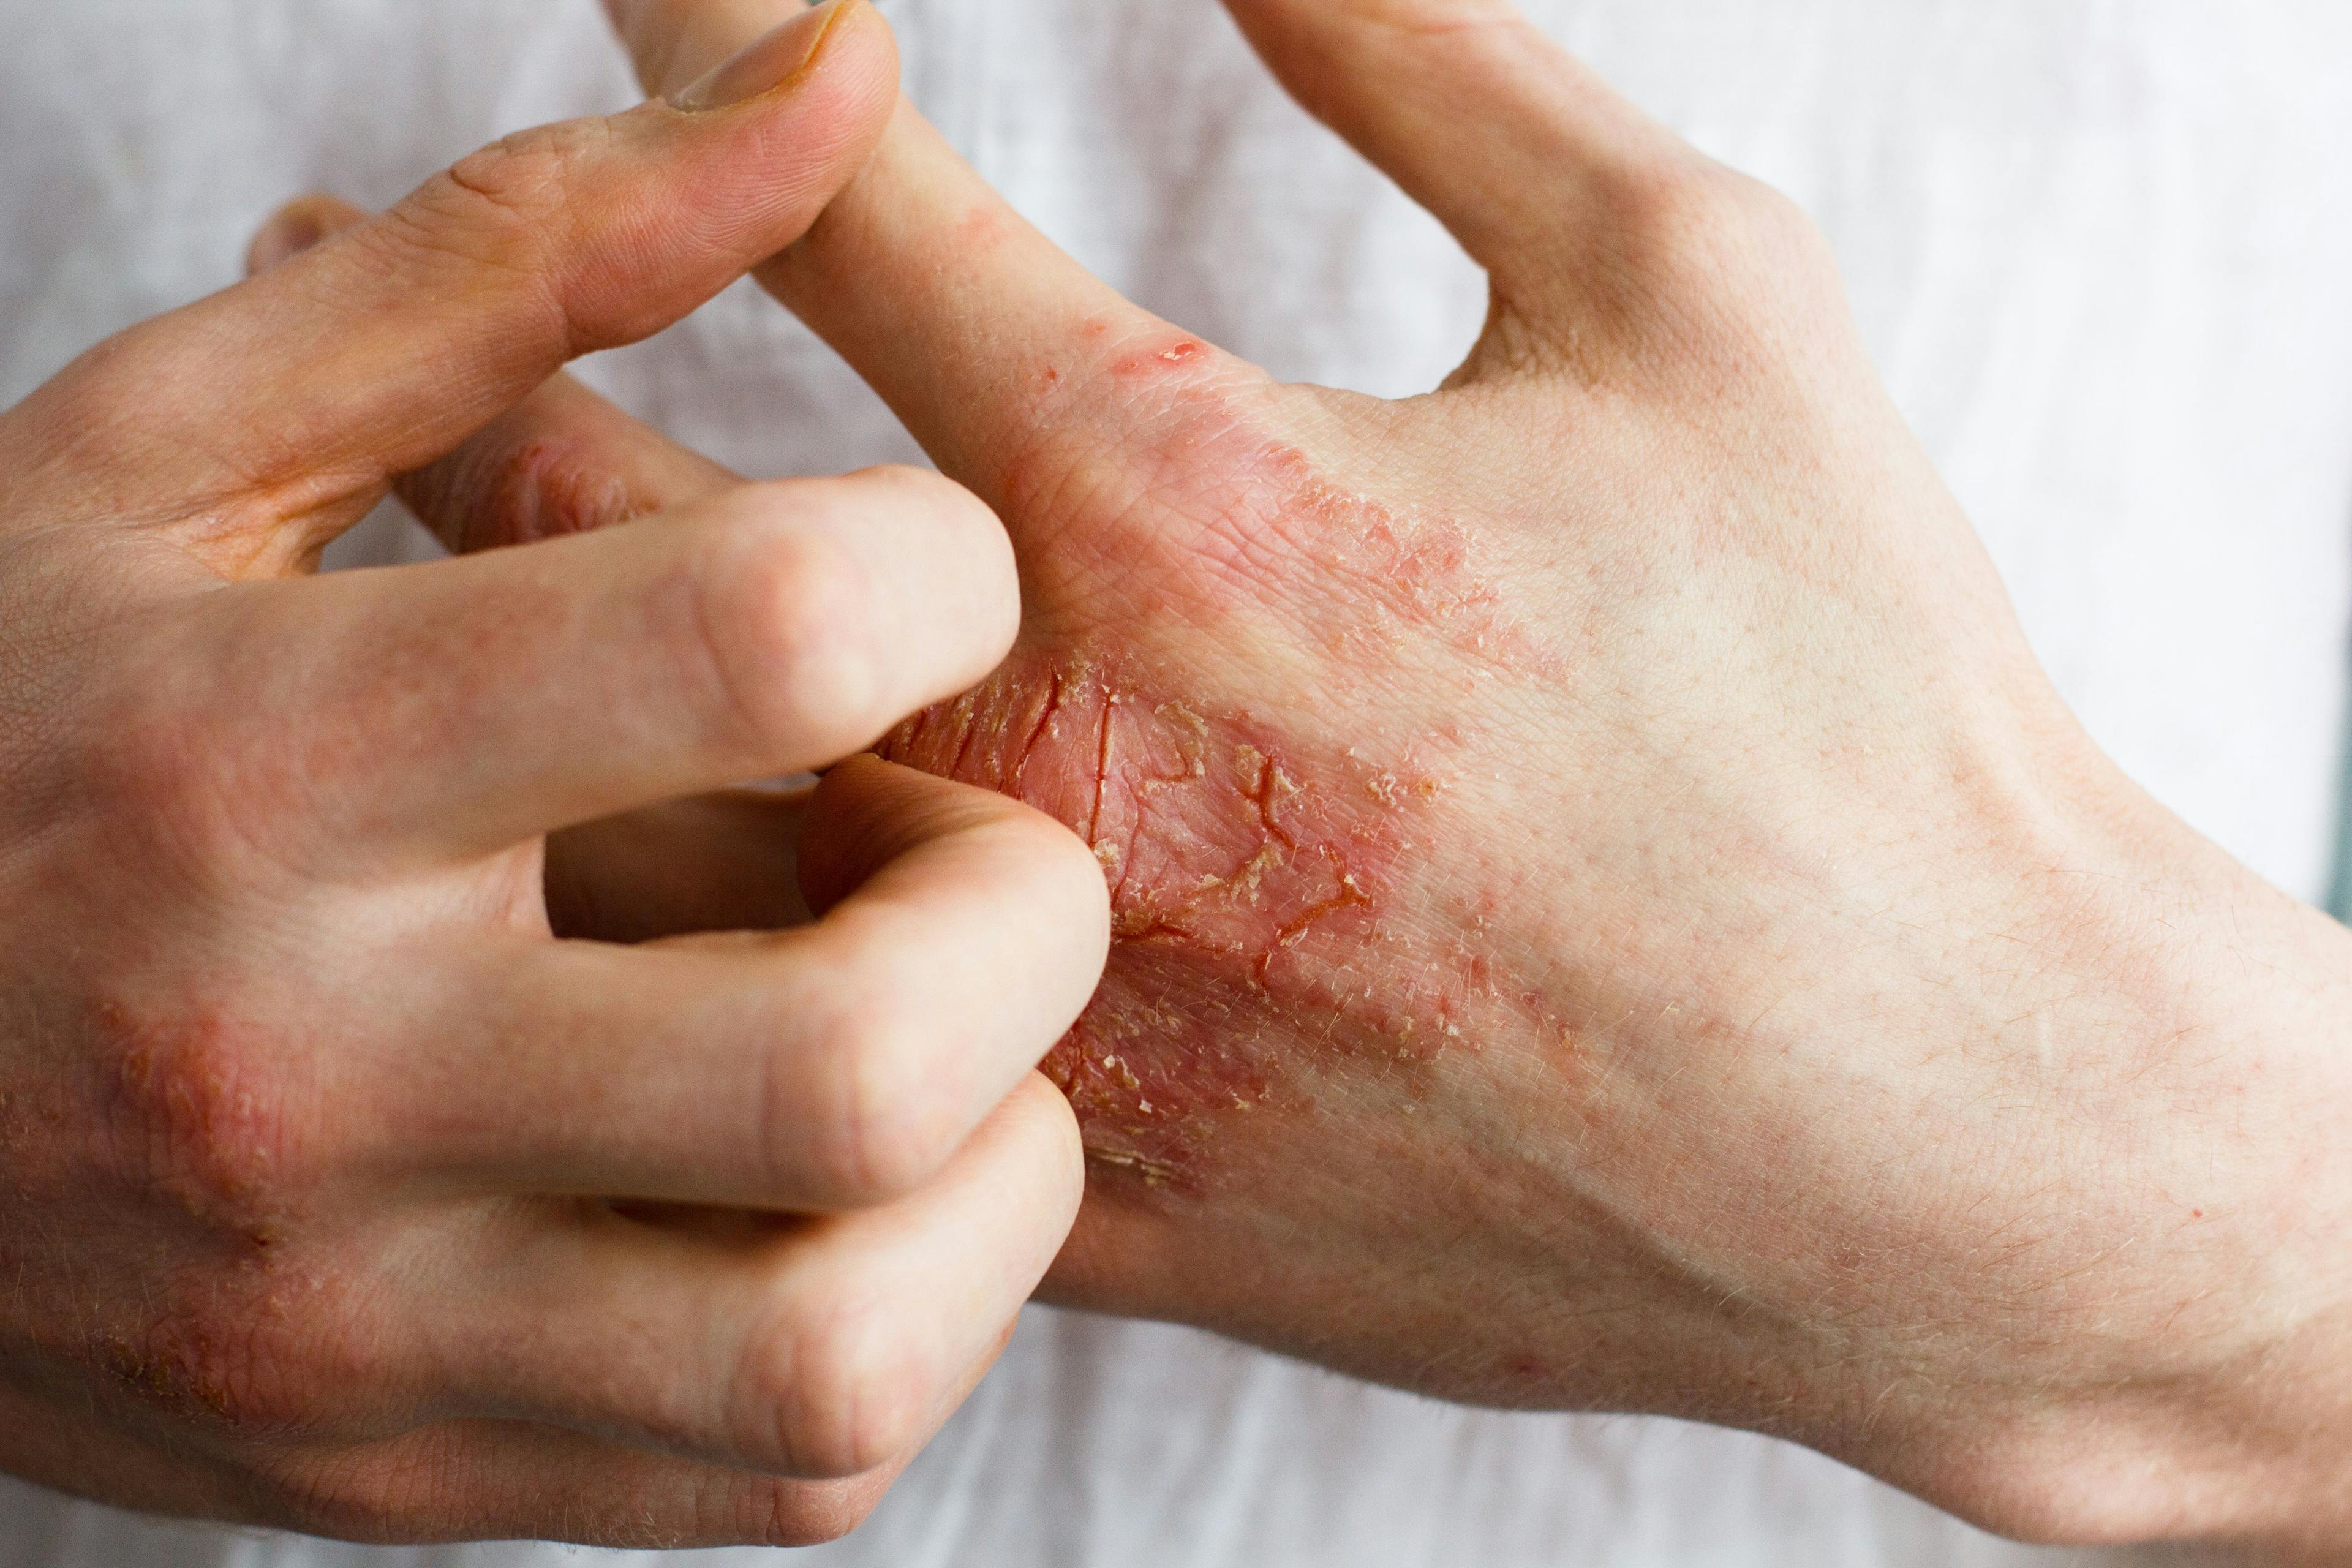 94% of Patients With Atopic Dermatitis Report Satisfaction With Baricitinib Treatment